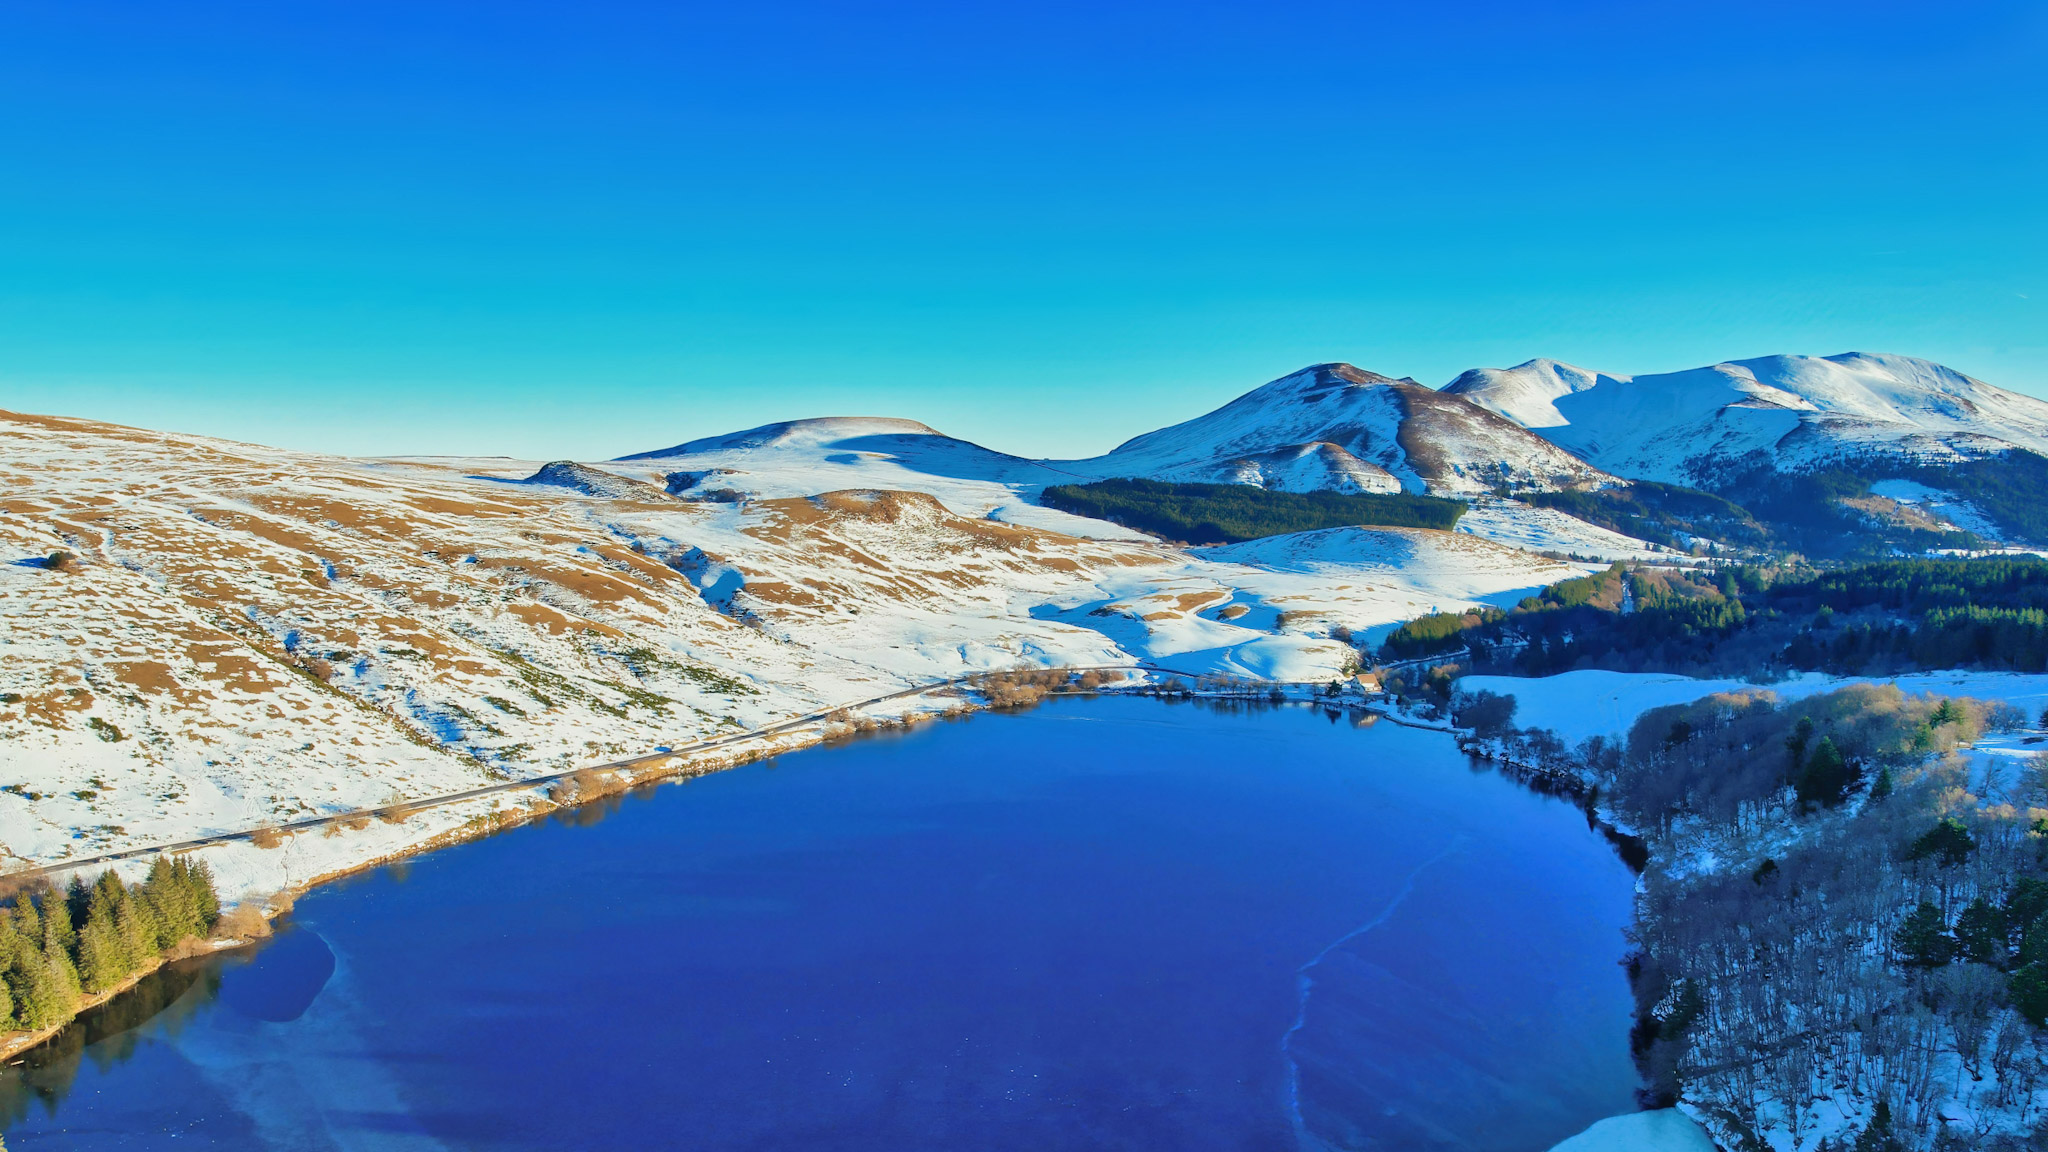 panorama of the snow-capped Lac de Guéry